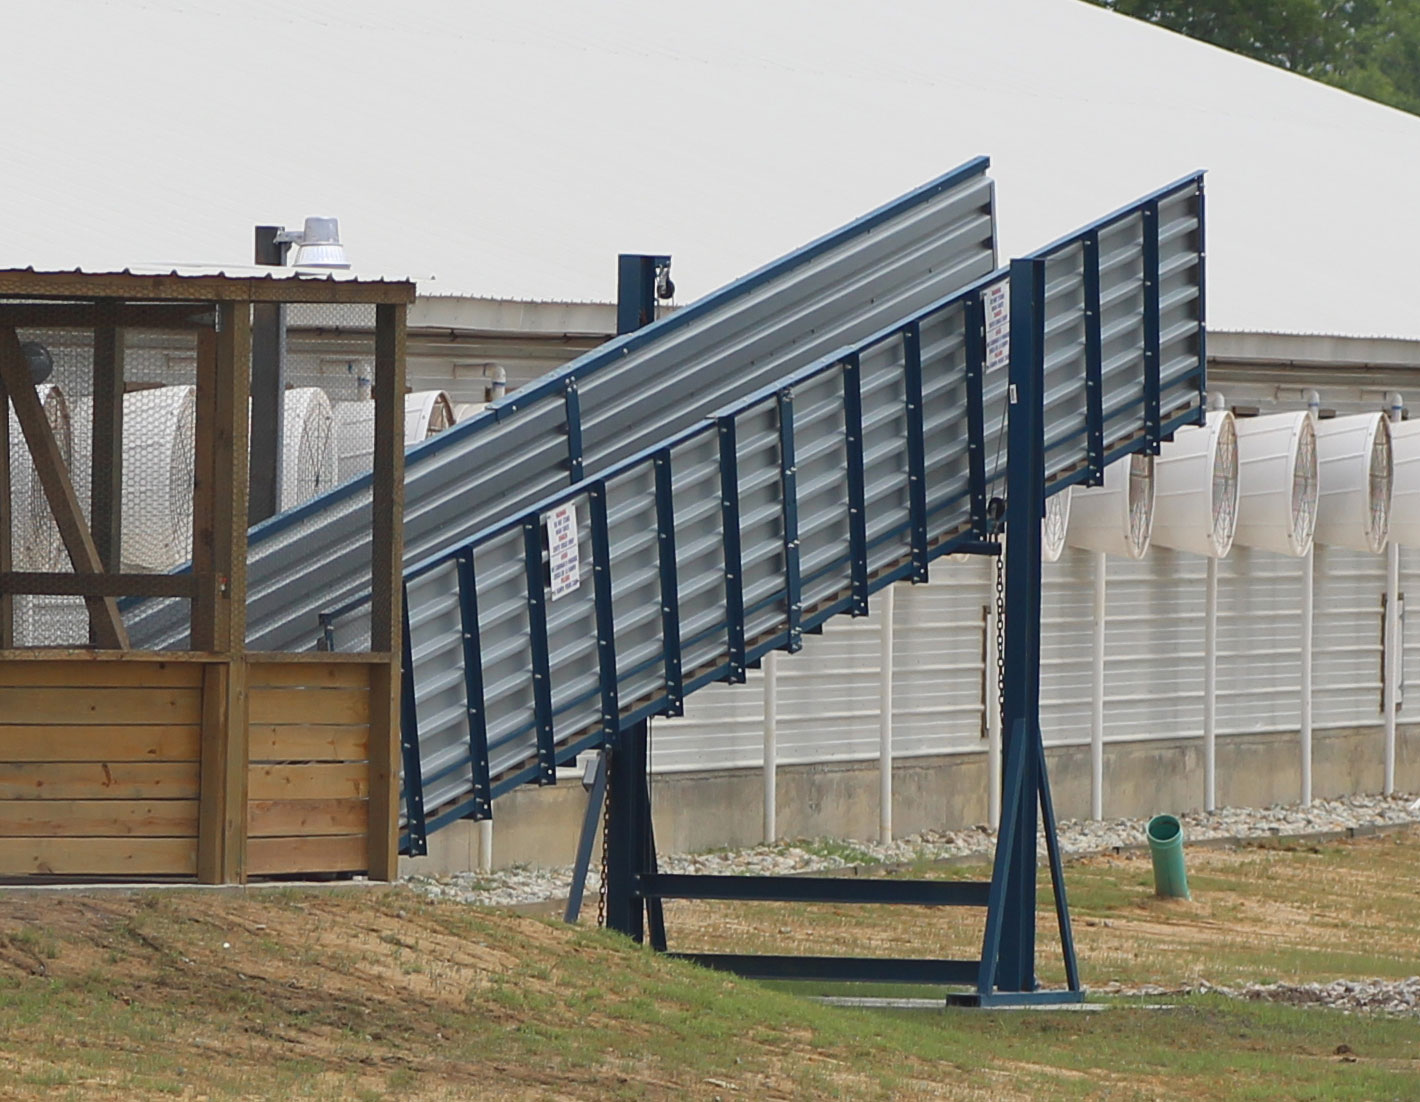 Hog Slat stationary loading chutes are available in multiple configurations to meet the needs of any swine production operation.